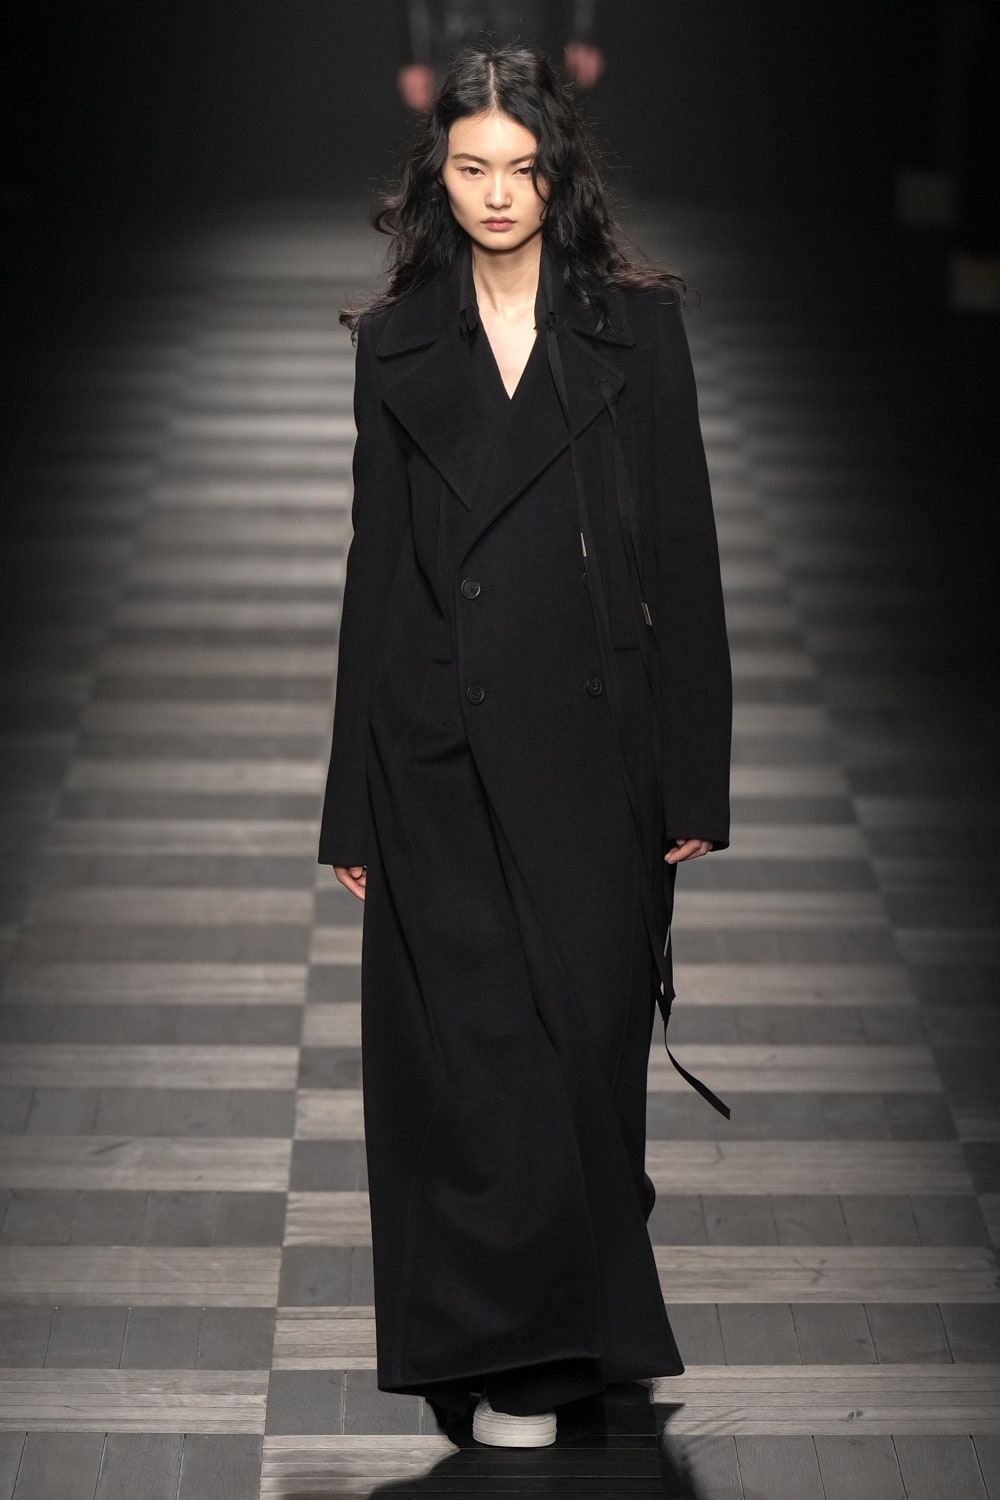 Olivier_Rizzo_Ann_D_FW22_Look_14_heconghc.jpeg